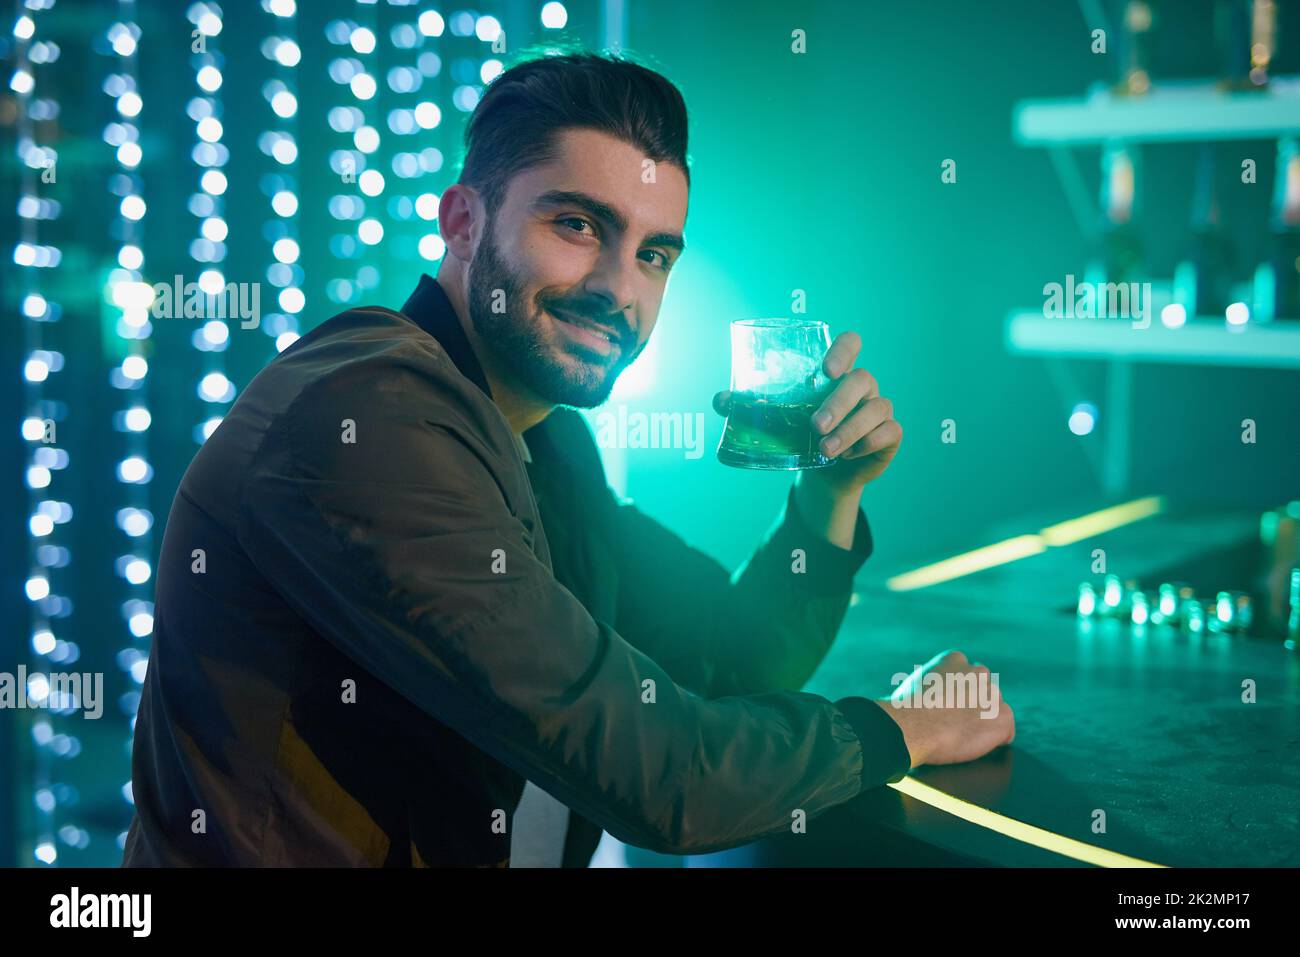 Welcoming the weekend. Portrait of a relaxed young man drinking alone in a bar. Stock Photo